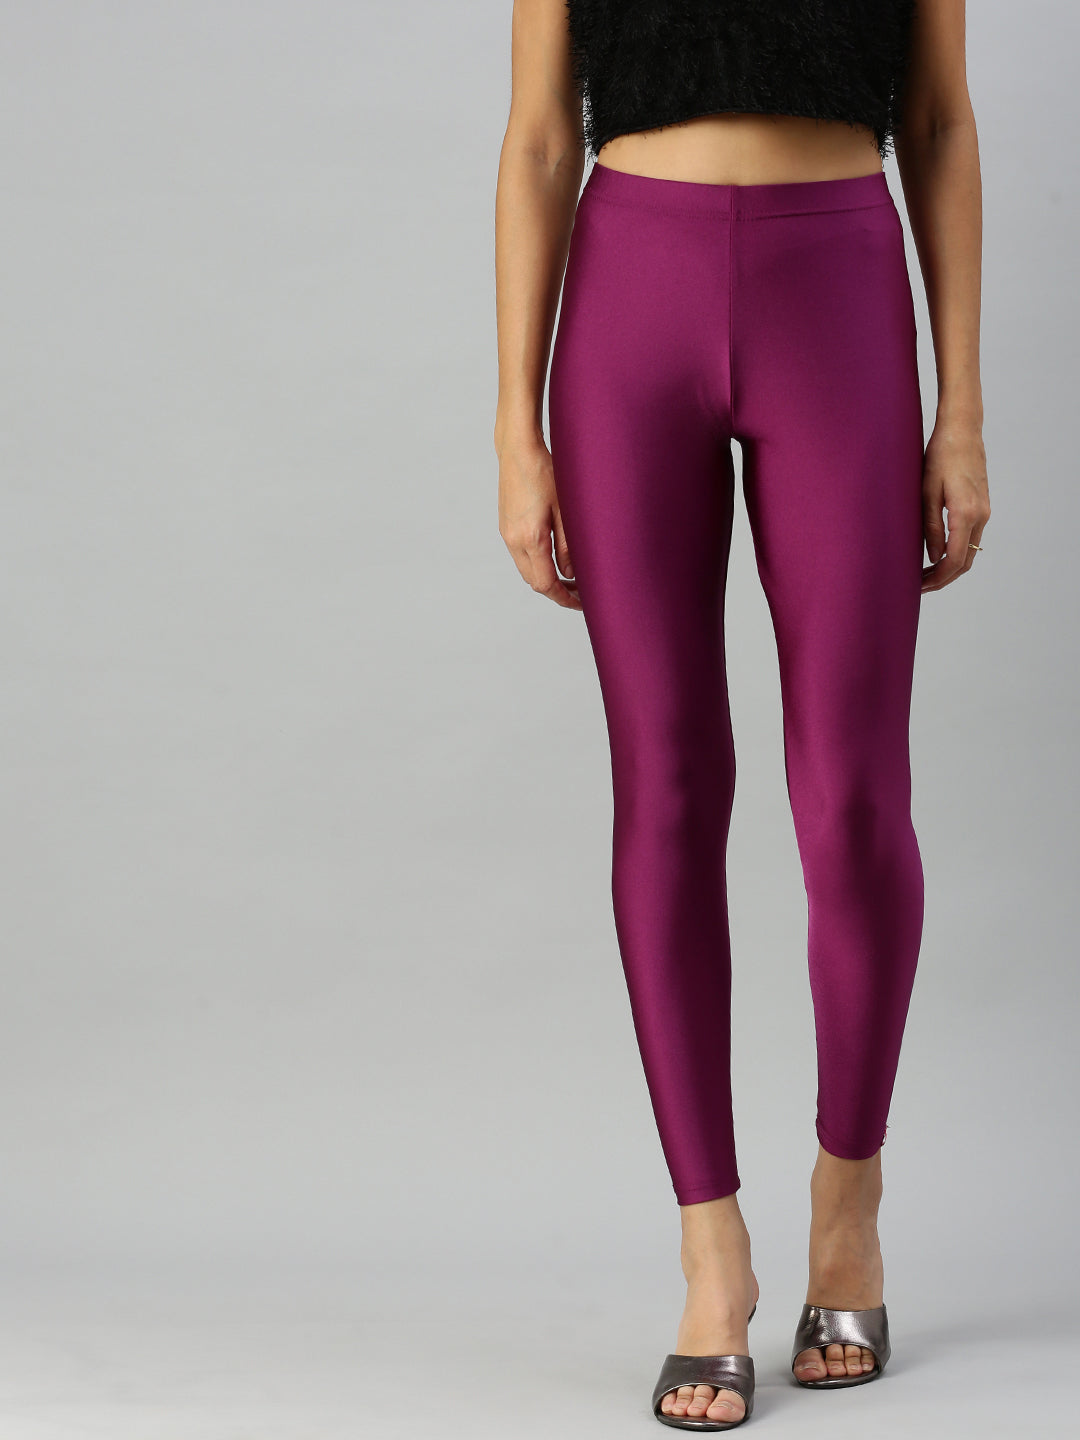 Look　a　in　Leggings　Chic　Plum　for　Prisma　Shimmer